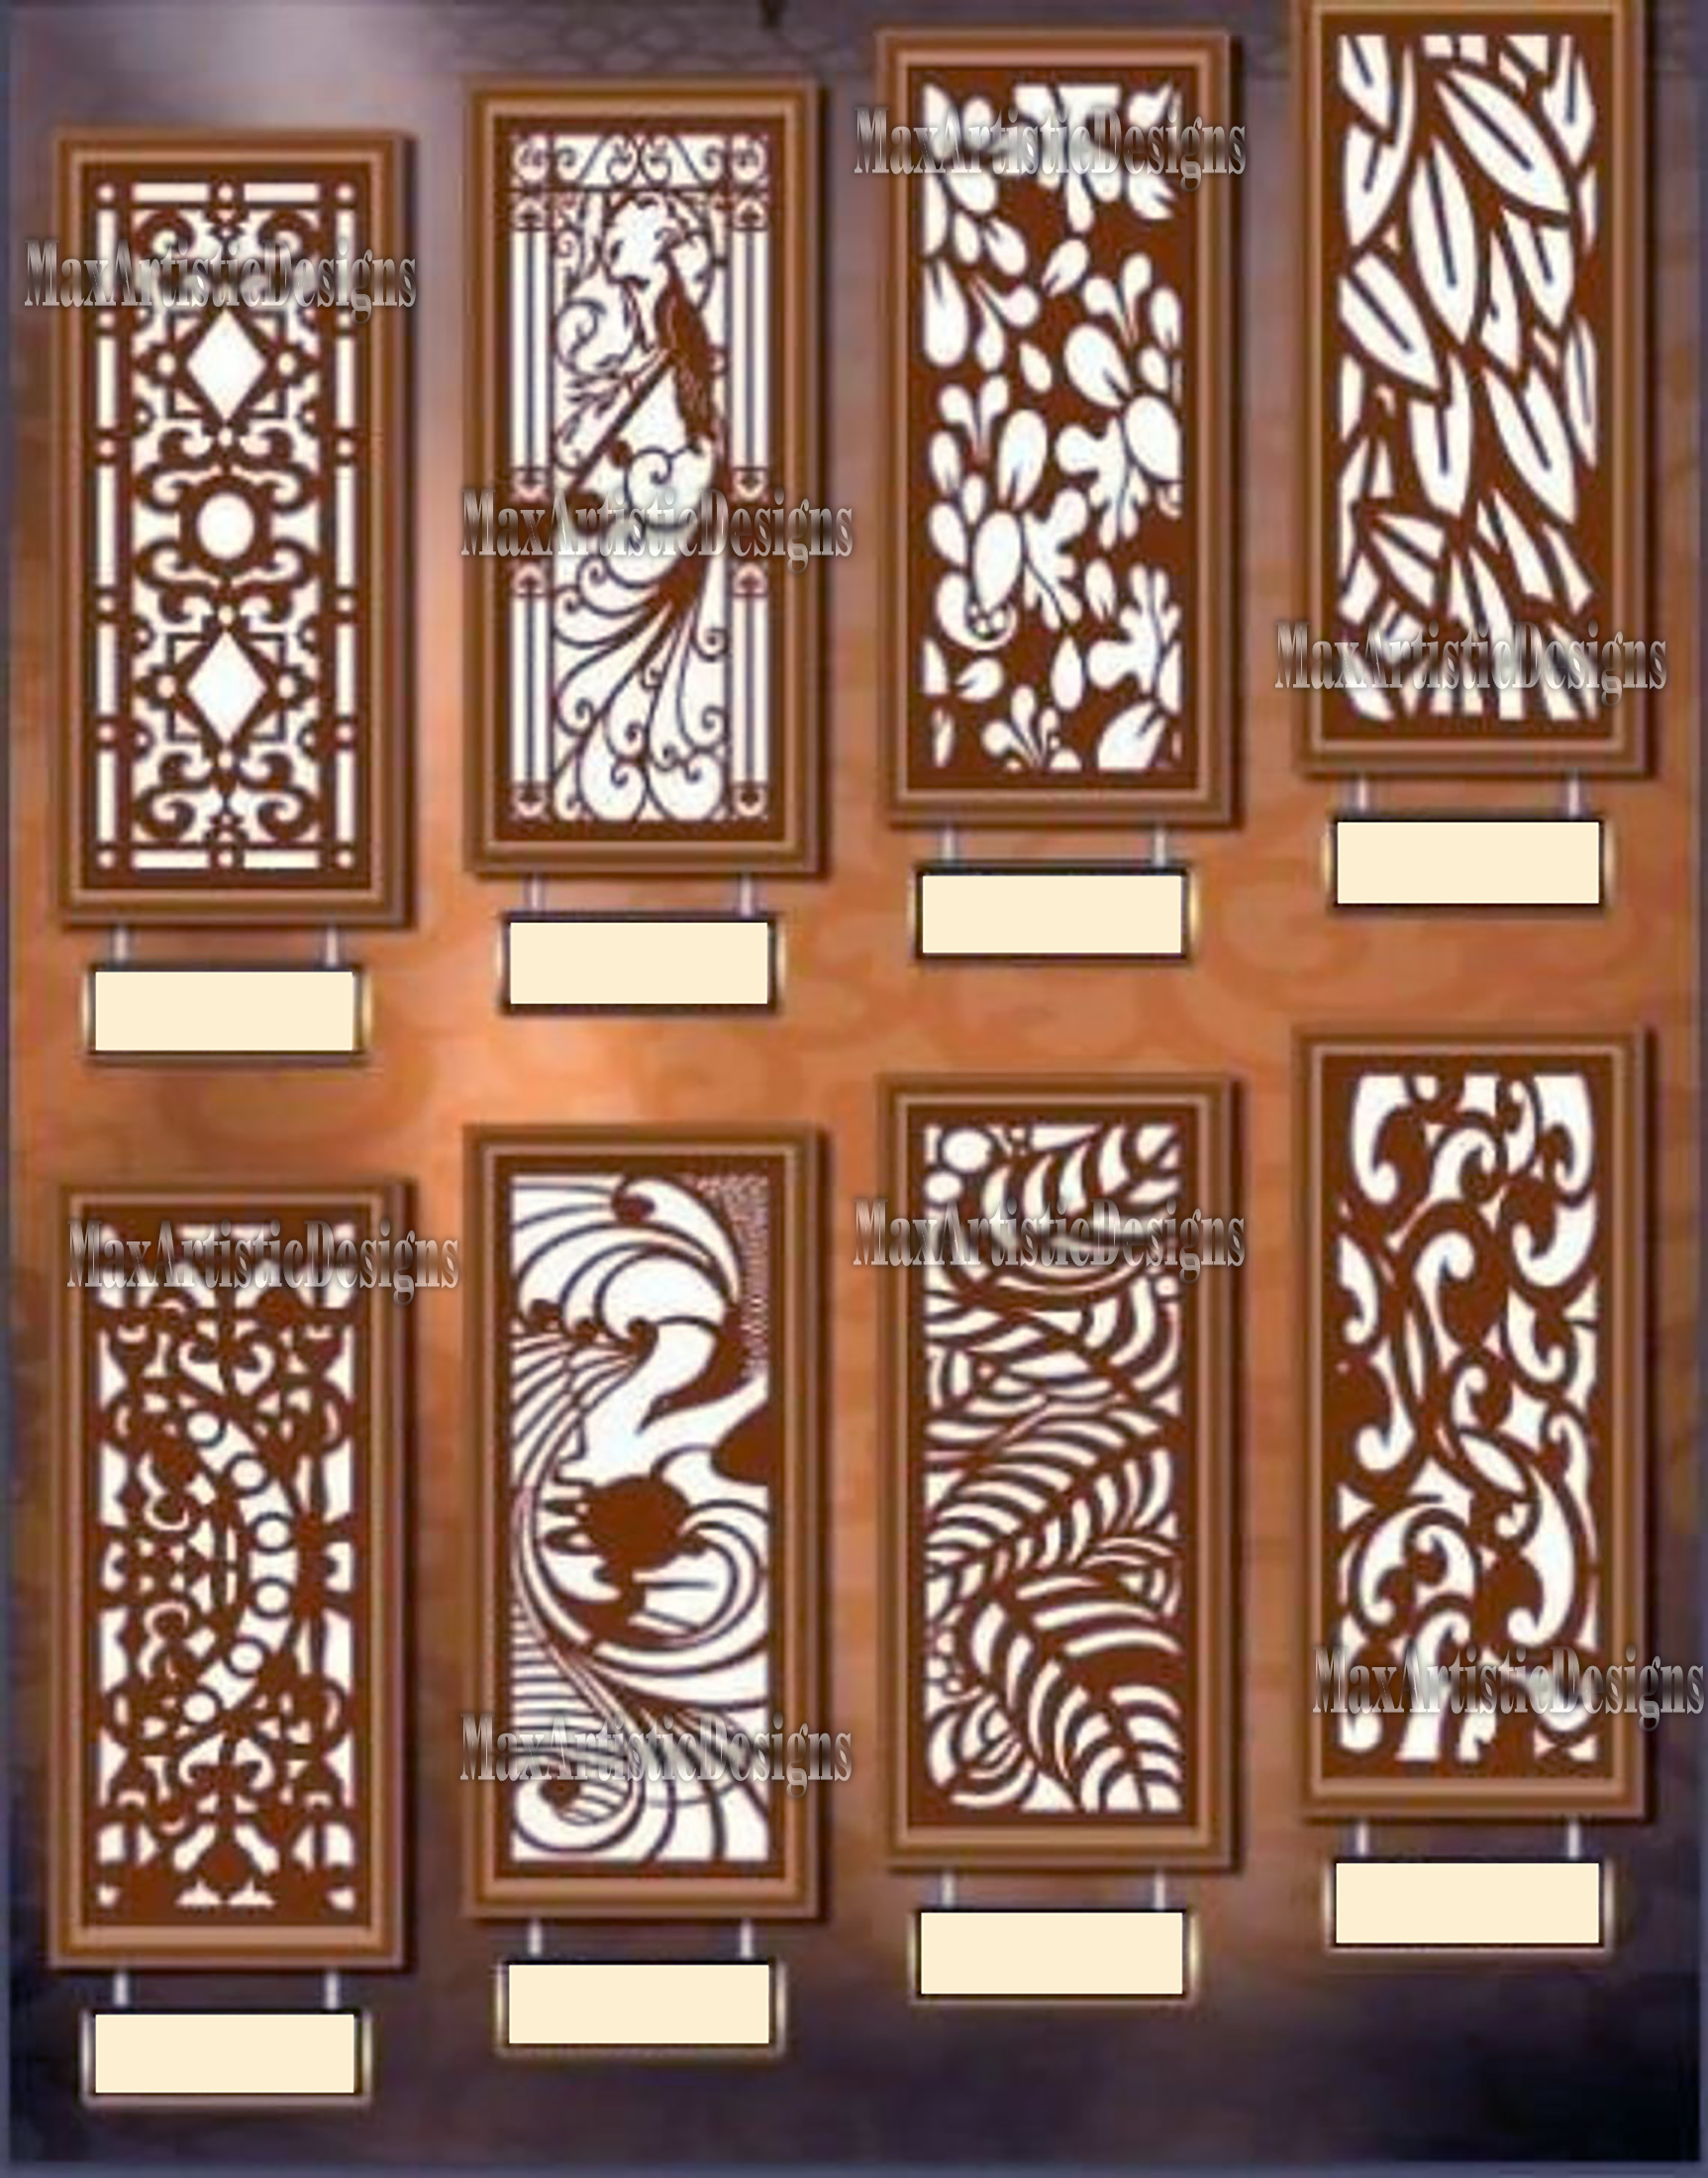 450 dxf file art panels decor cnc vector for plasma router laser cut dxf files tested cnc download